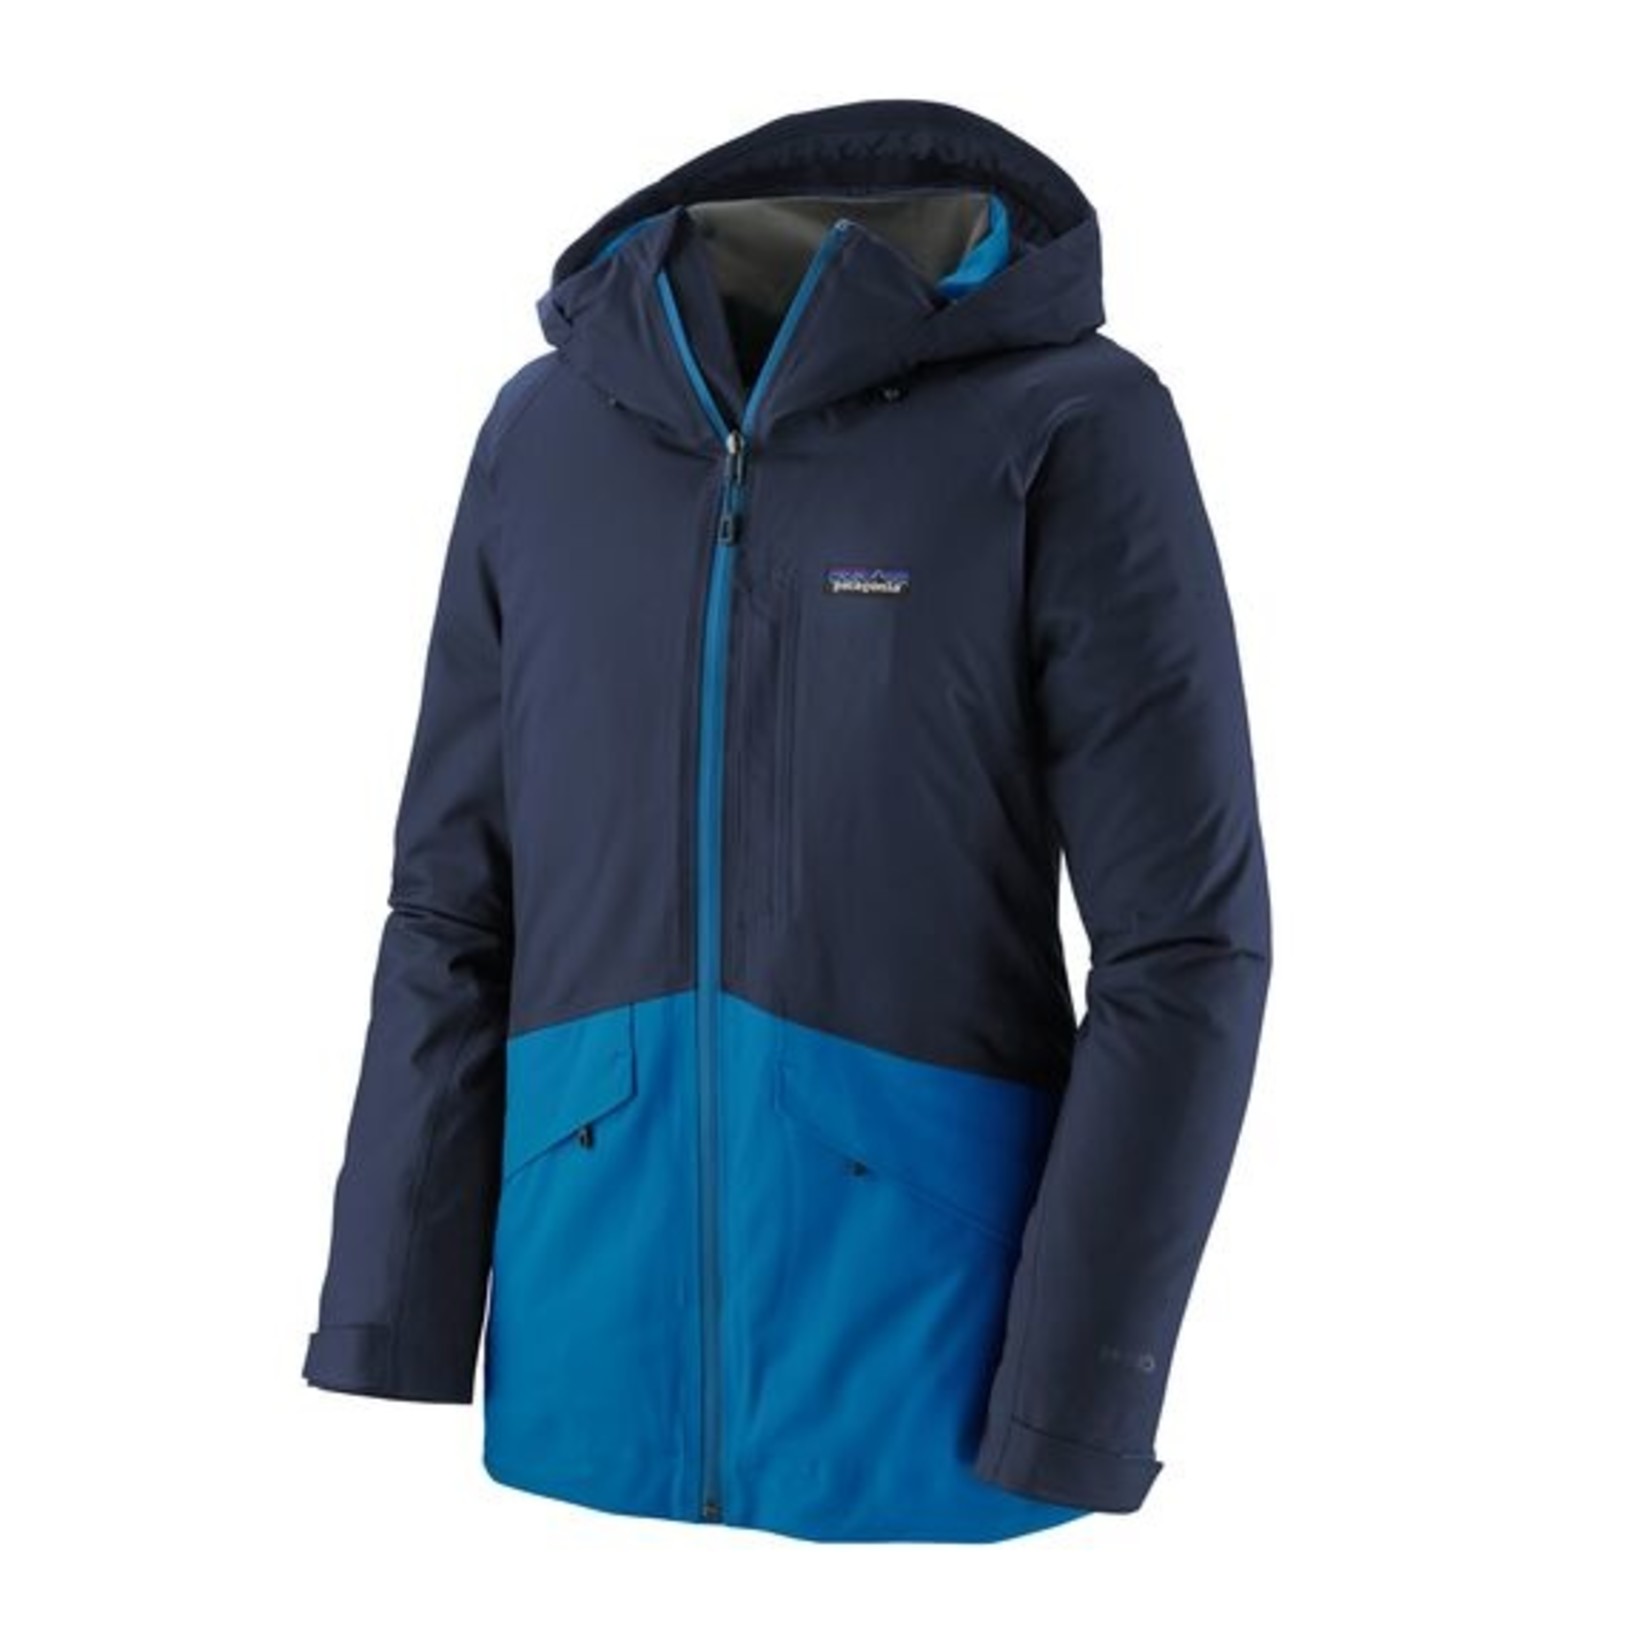 Patagonia Patagonia Women's Insulated Snowbelle Jacket